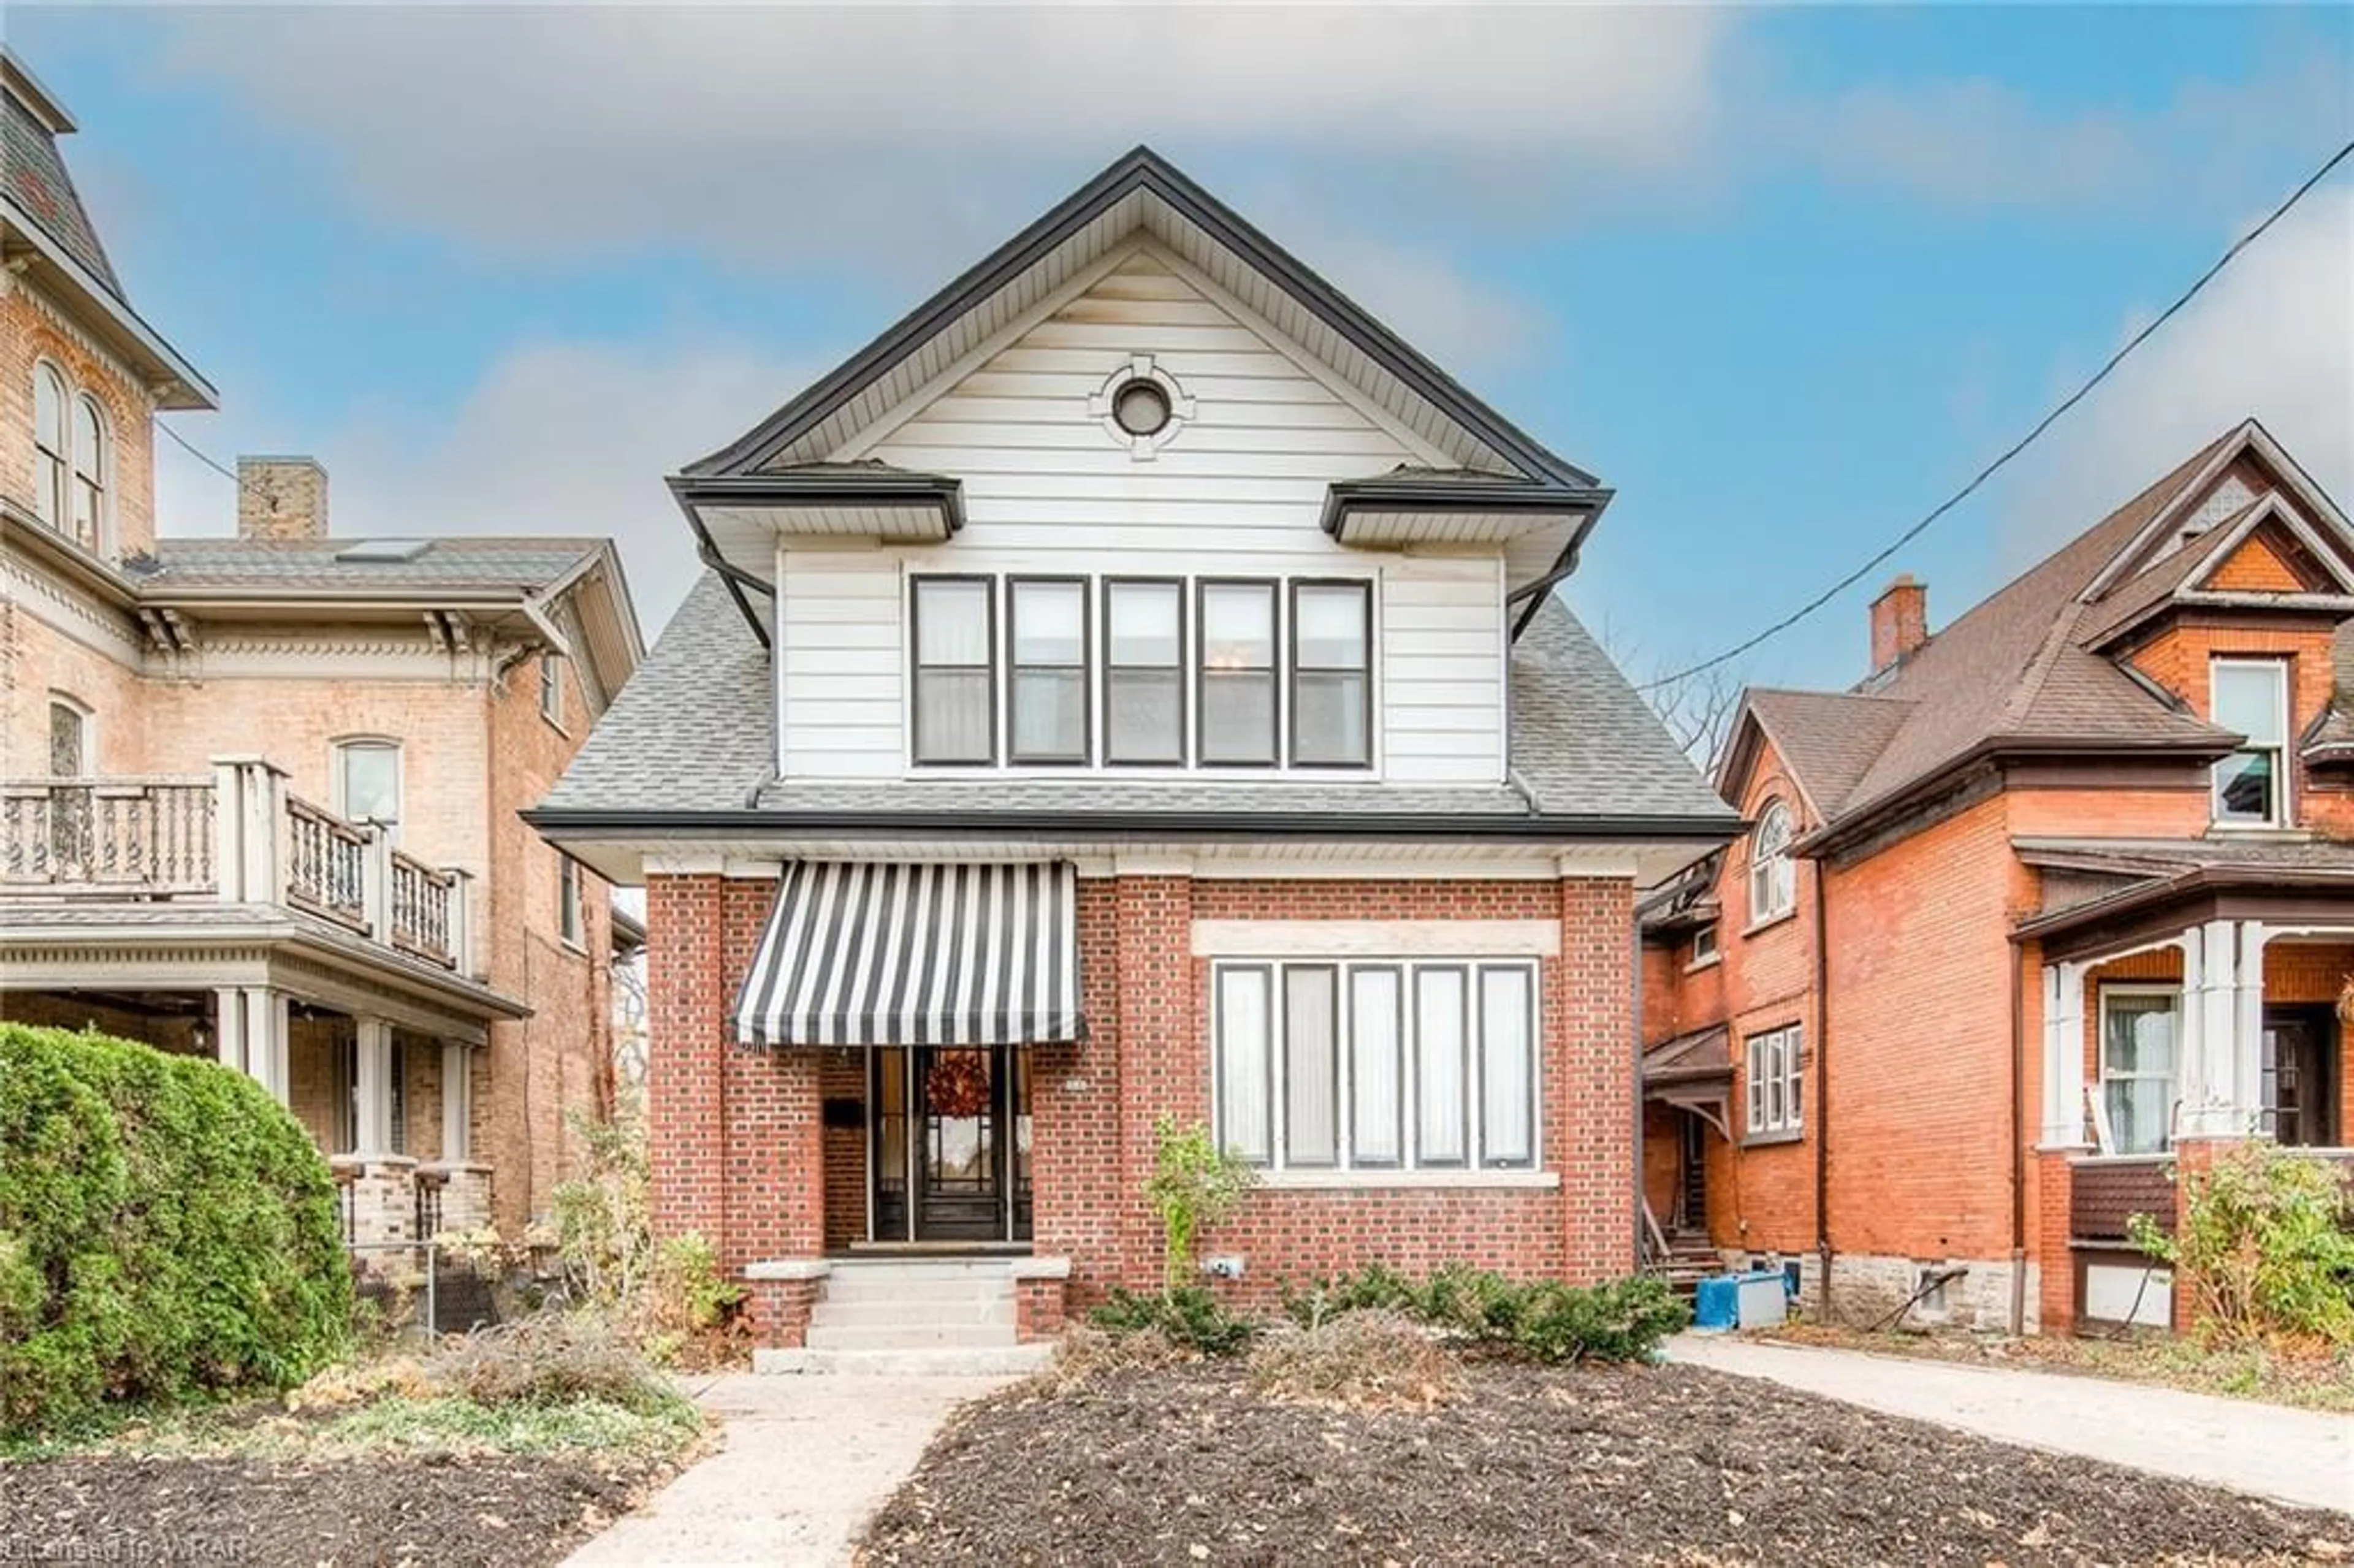 Home with brick exterior material for 33 Margaret Ave, Kitchener Ontario N2H 4H1